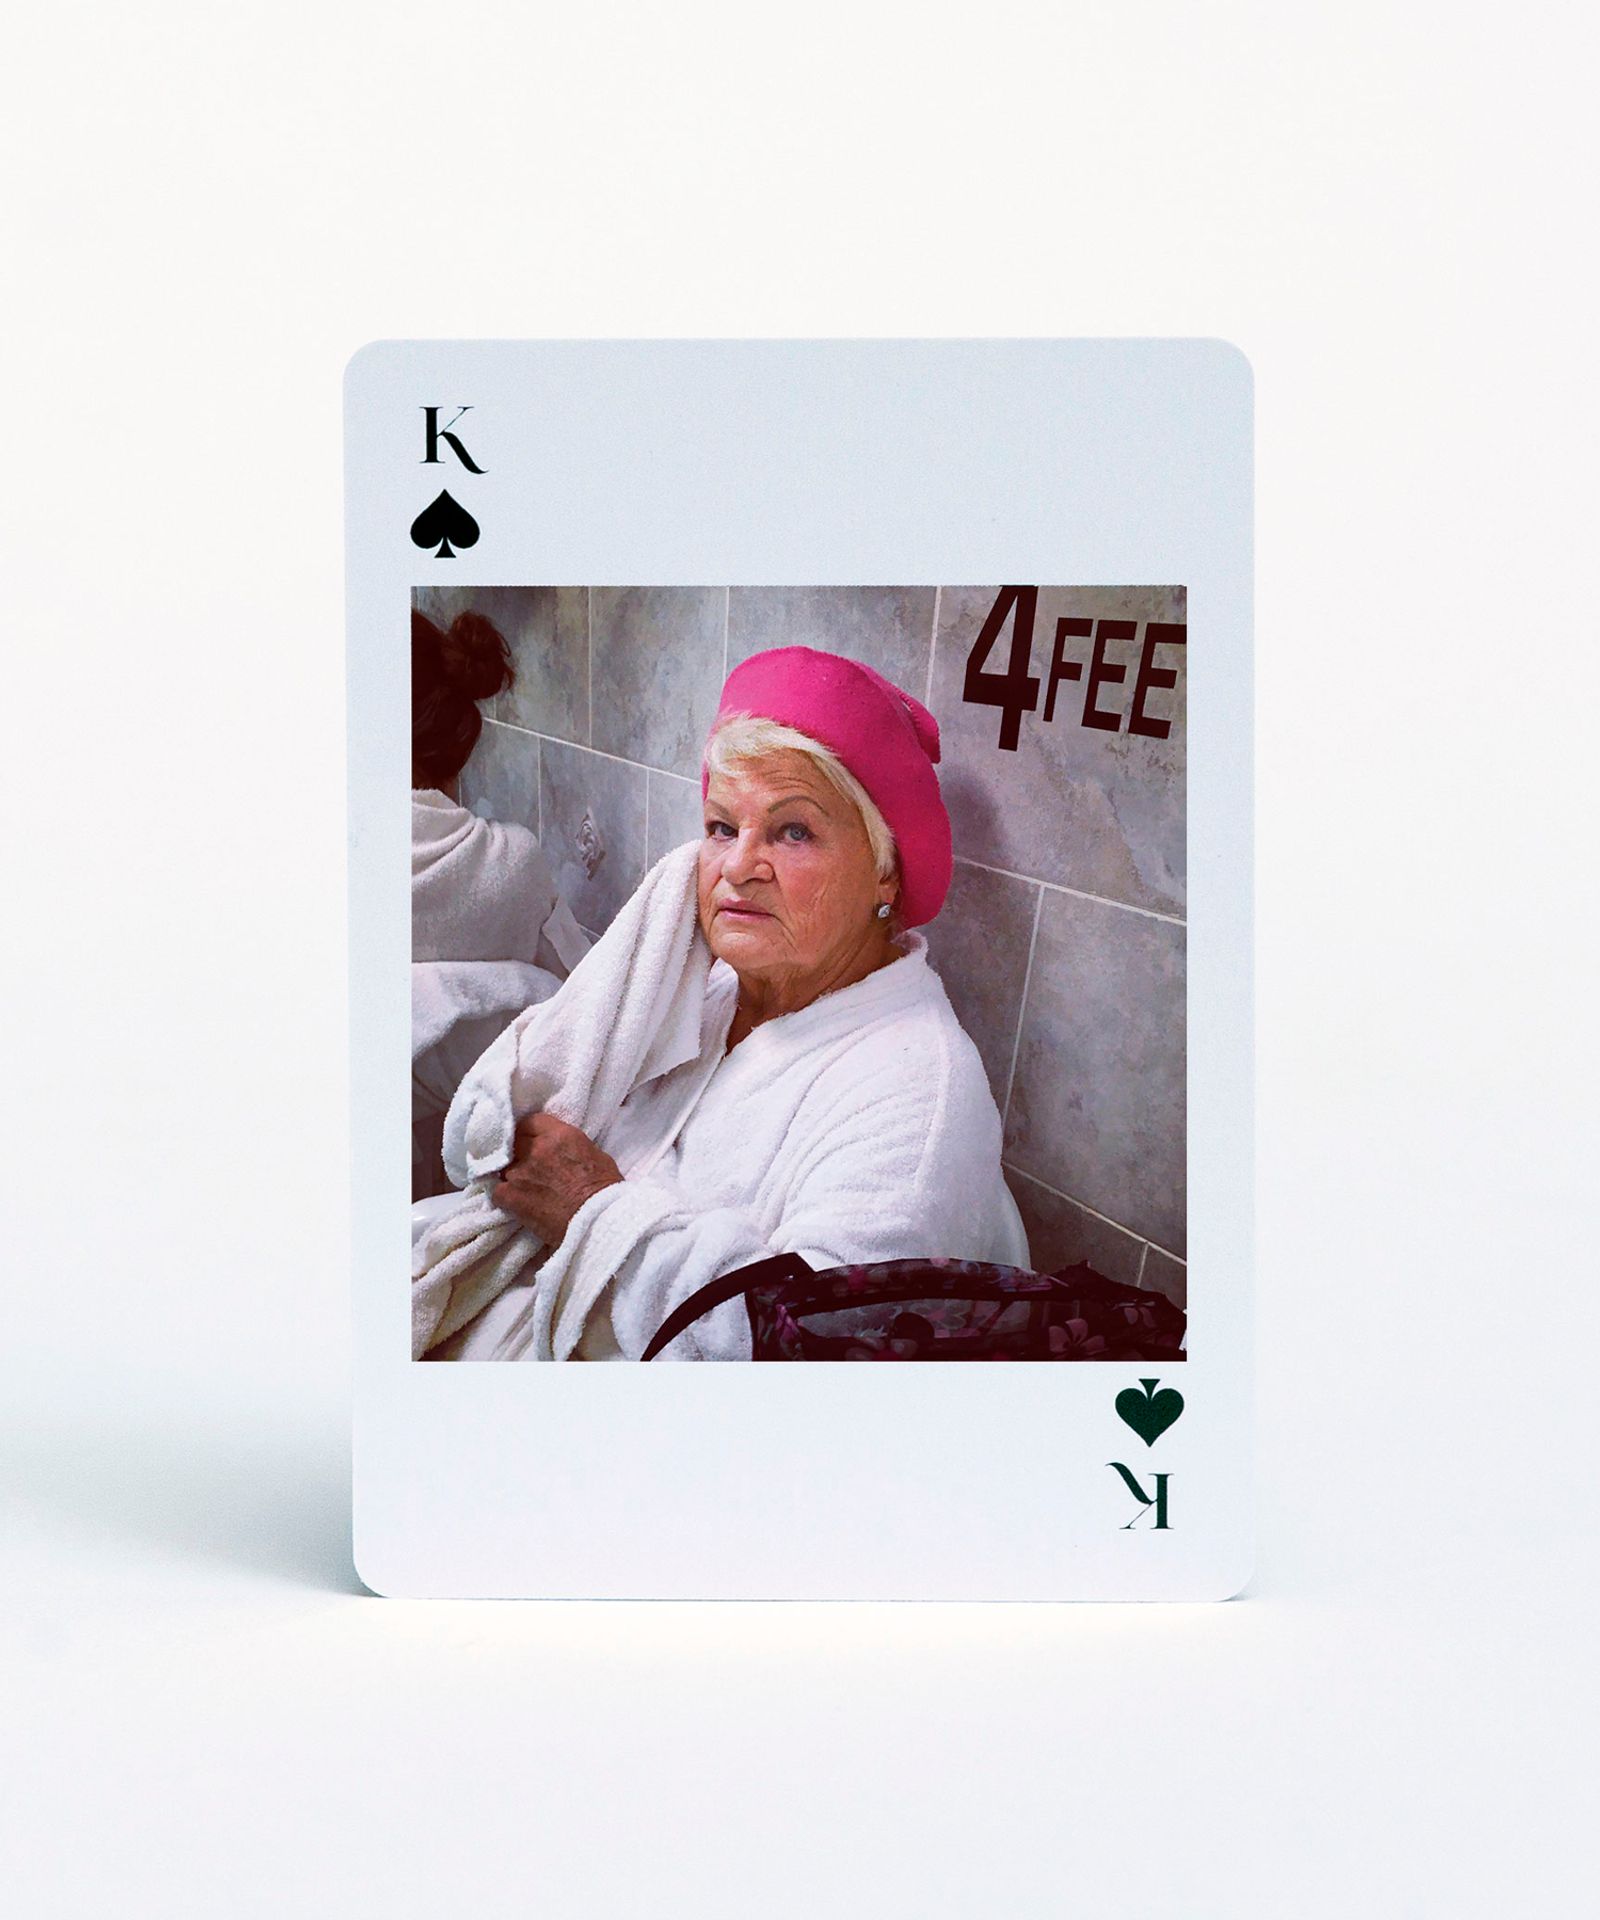 © Amy Touchette - Image from the New York City Street Dailies playing cards photography project